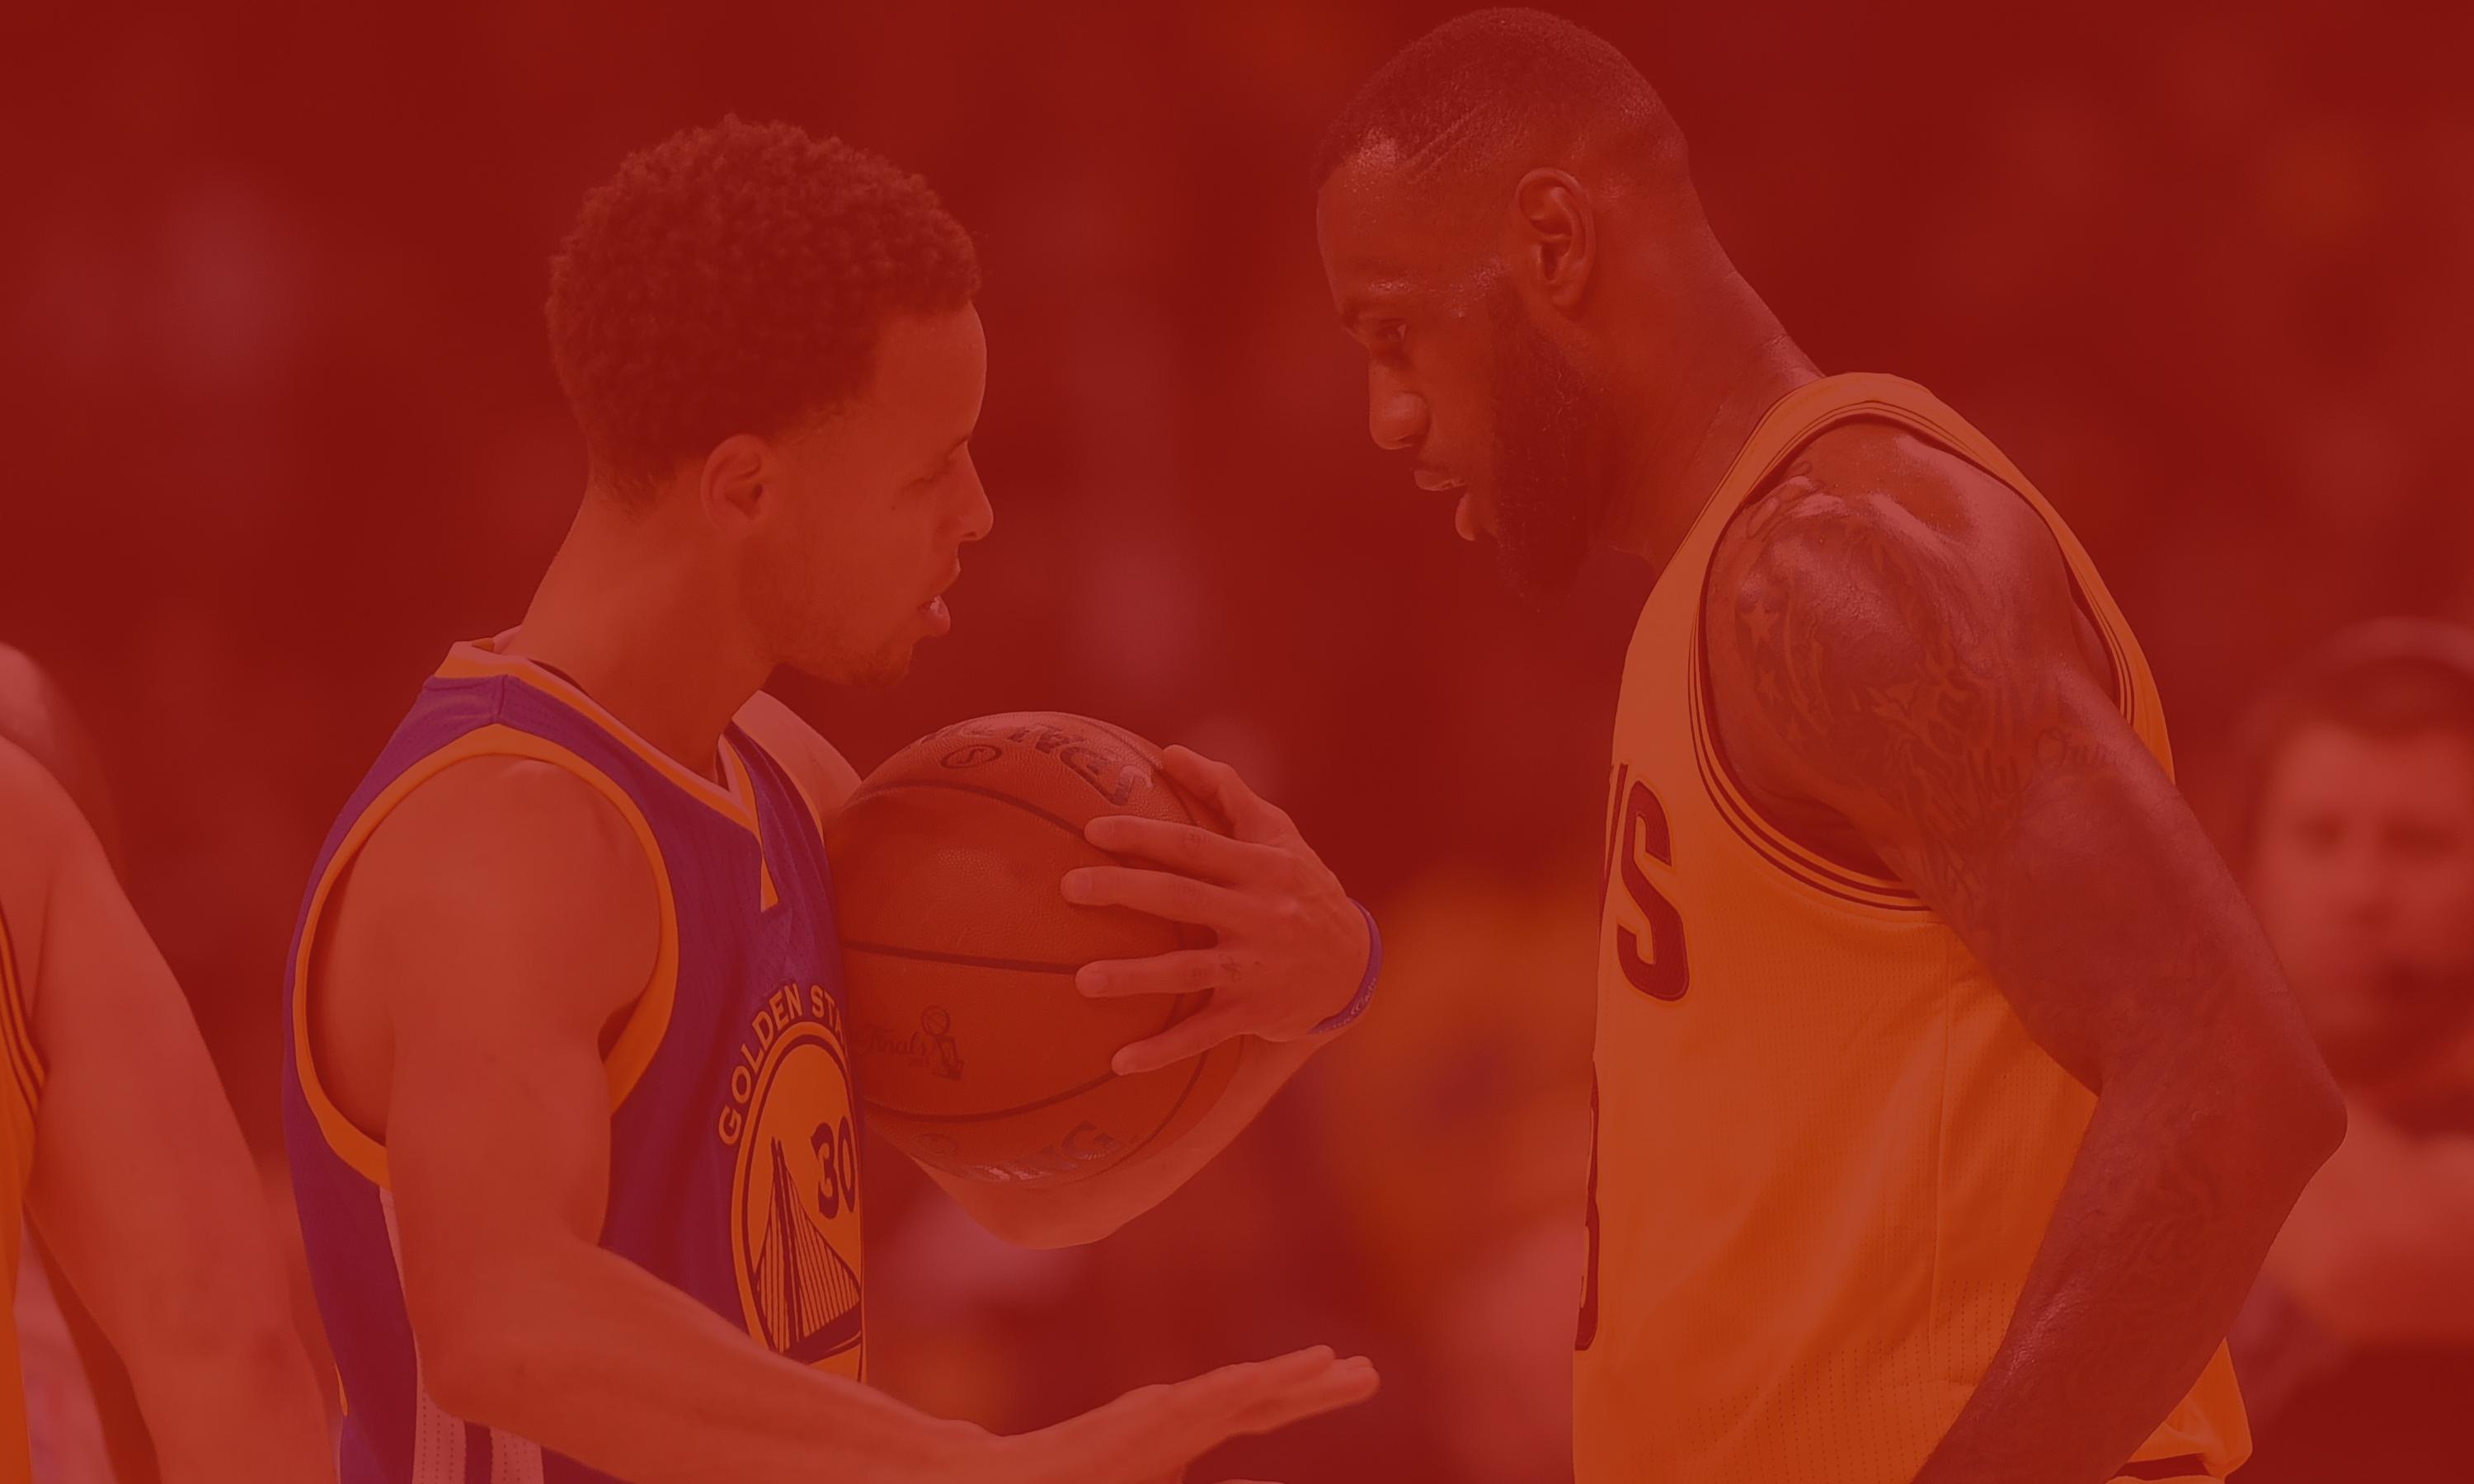 Better signature shoe – LeBron James or Steph Curry?